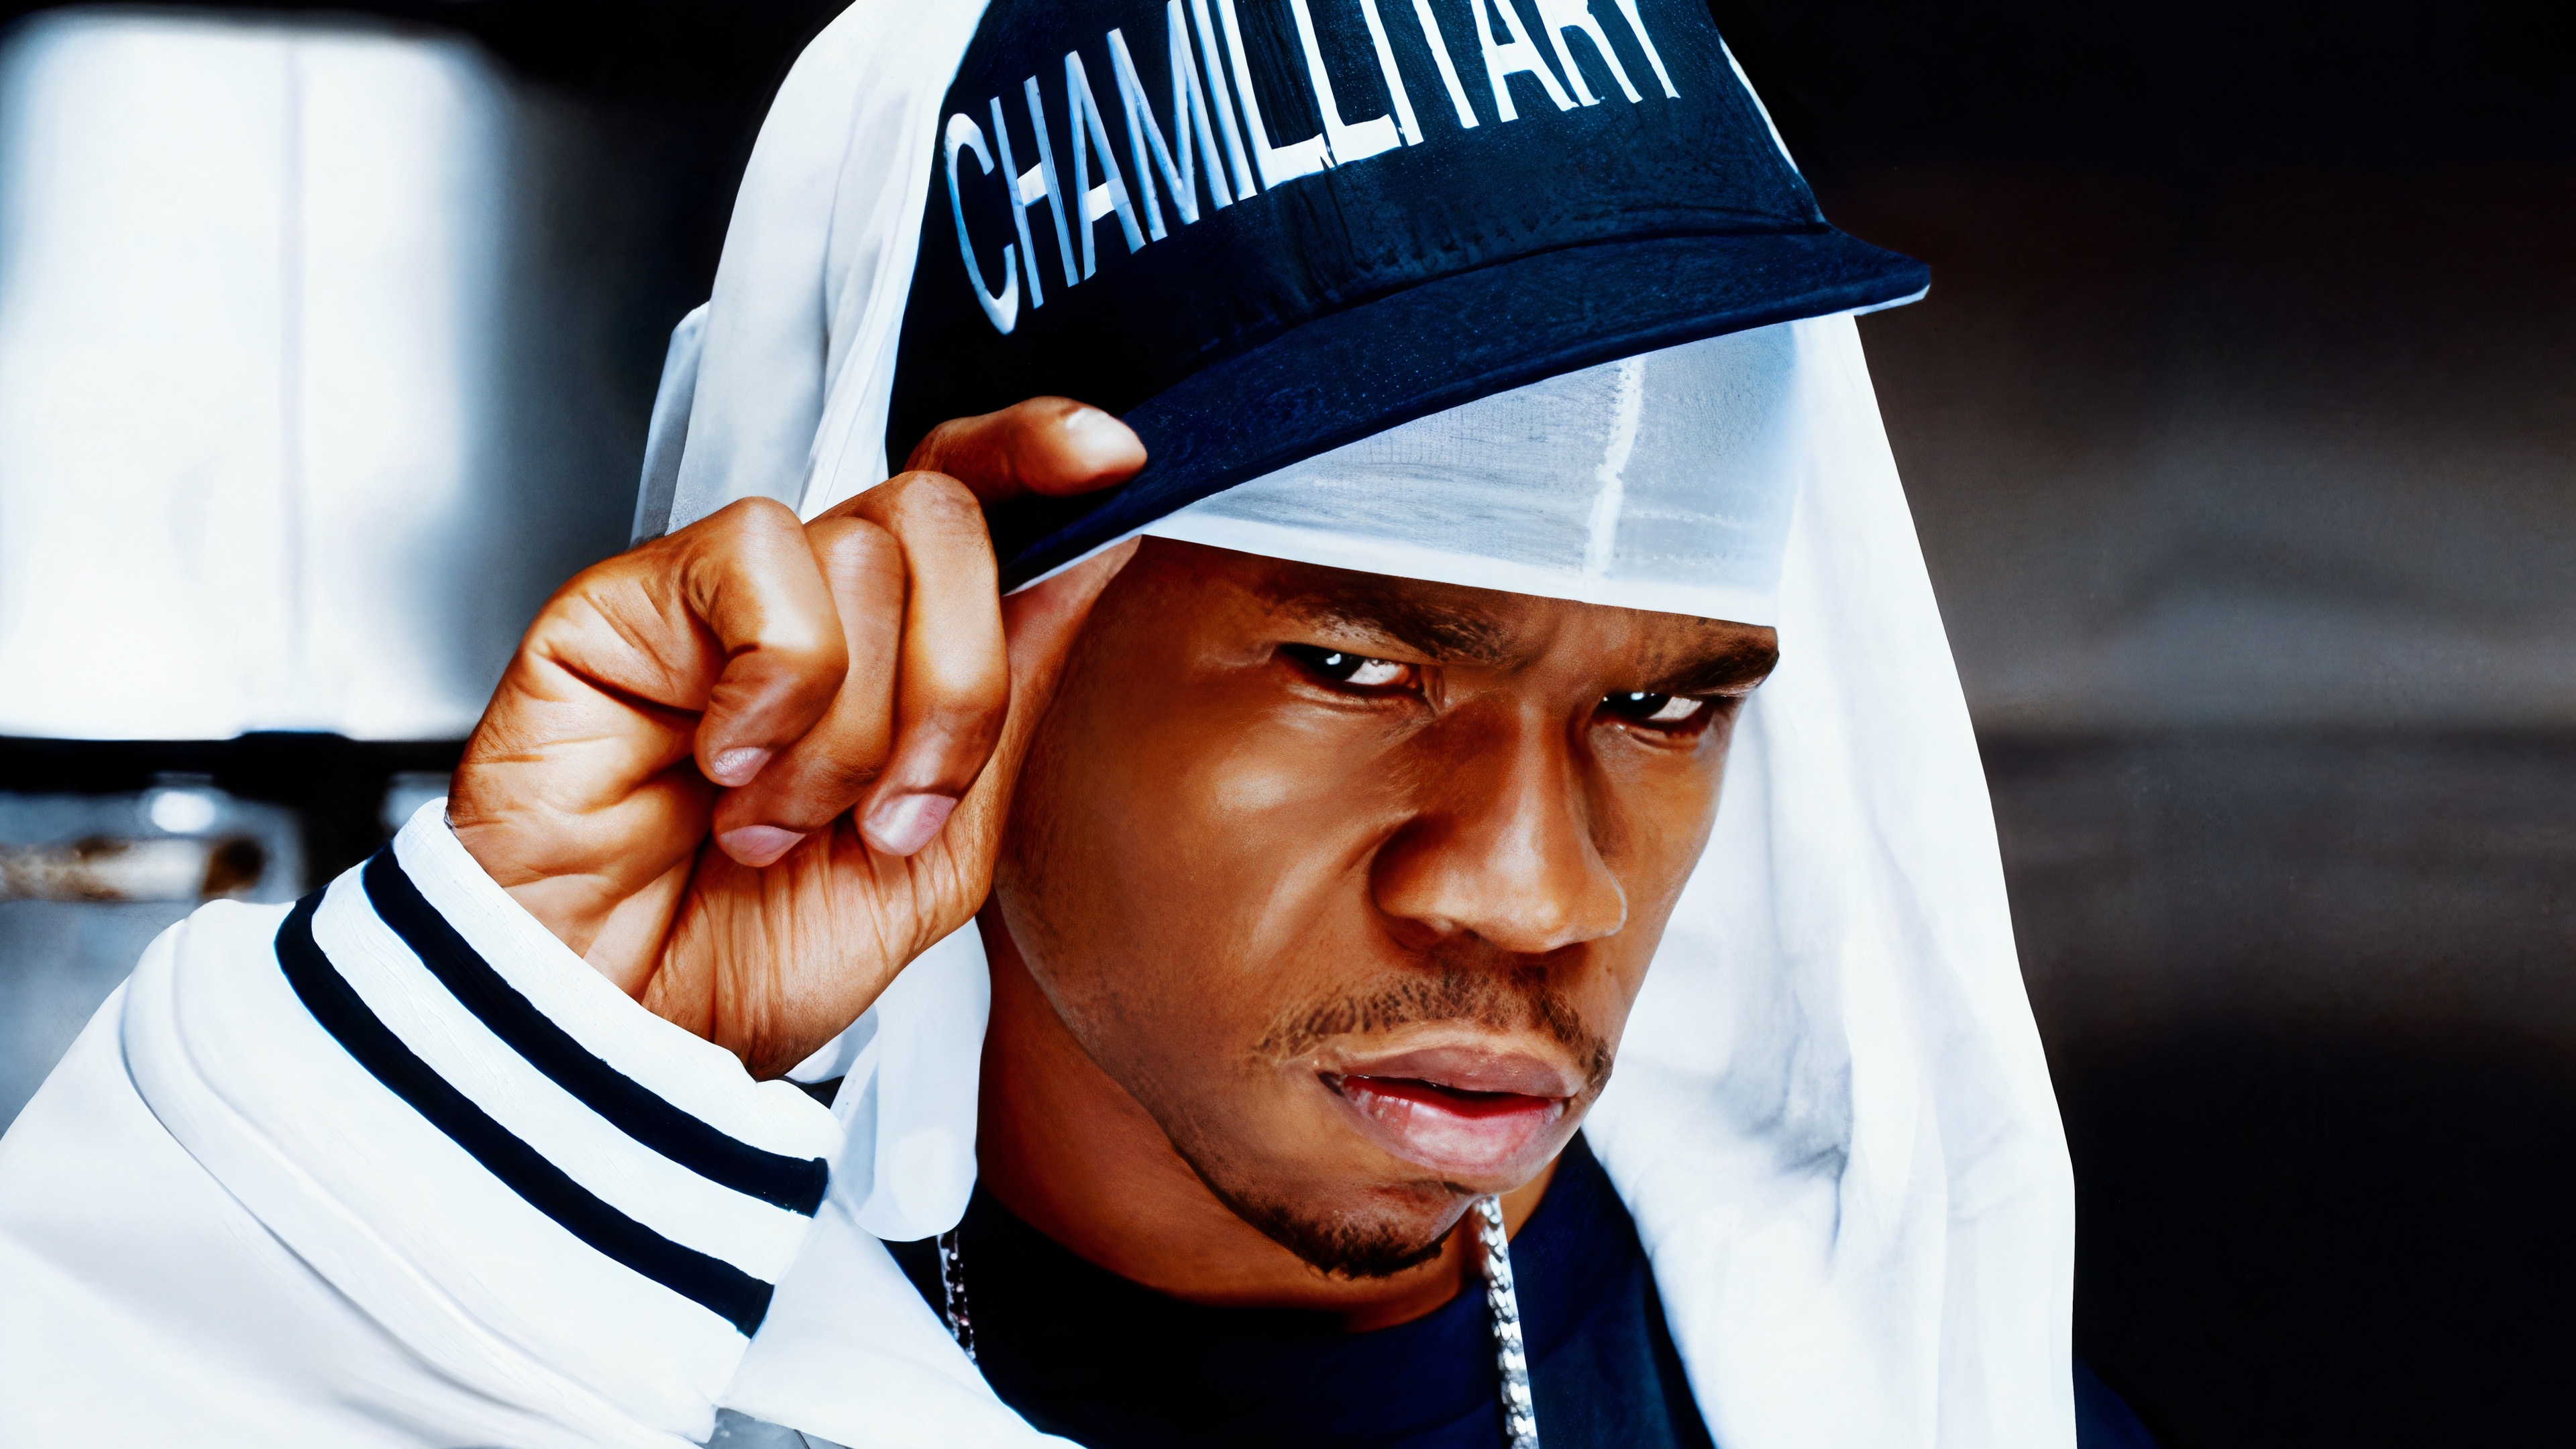 Chamillionaire Wallpapers (18+ images inside)